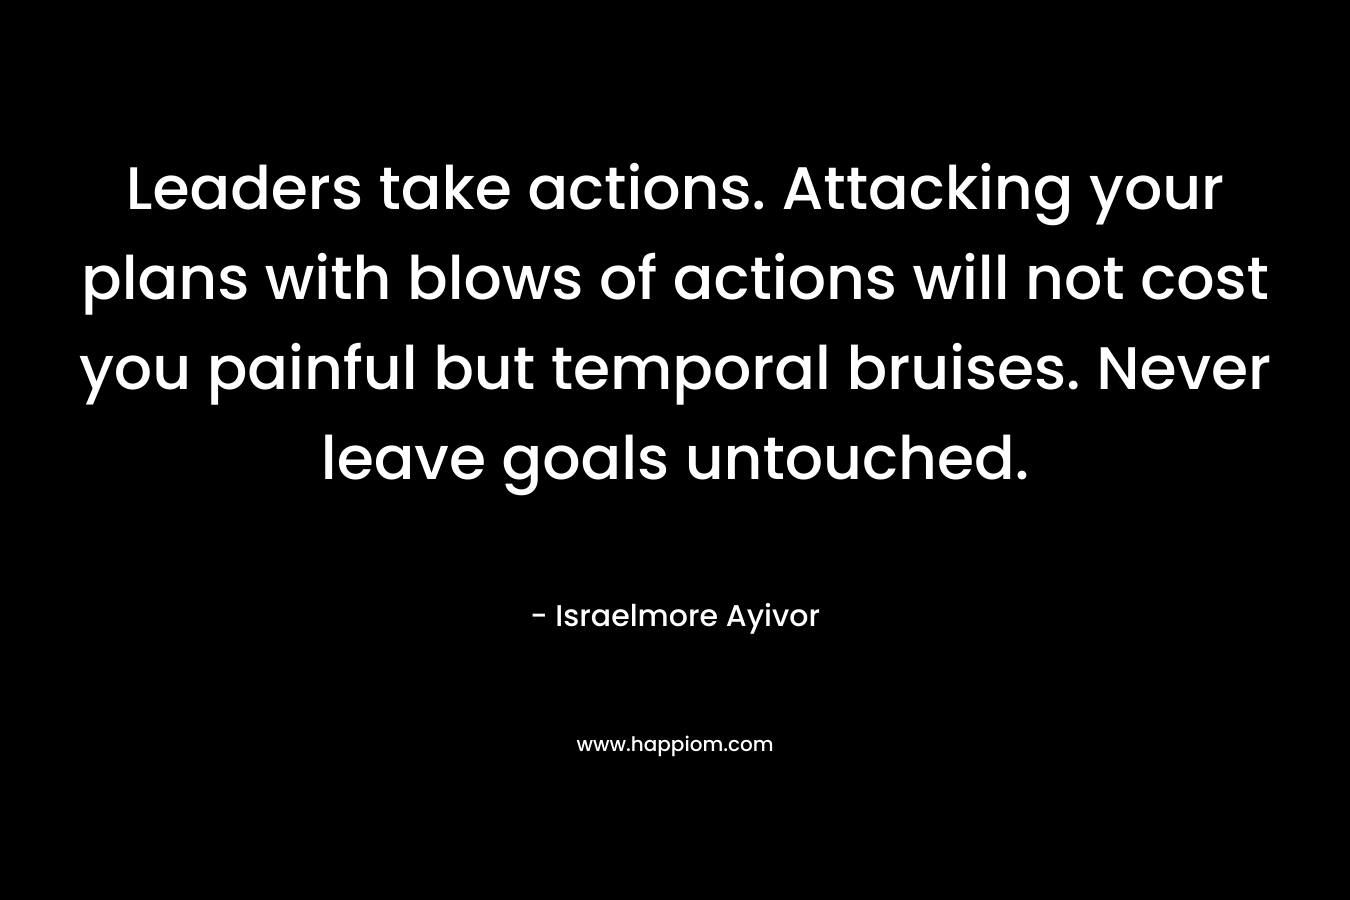 Leaders take actions. Attacking your plans with blows of actions will not cost you painful but temporal bruises. Never leave goals untouched.